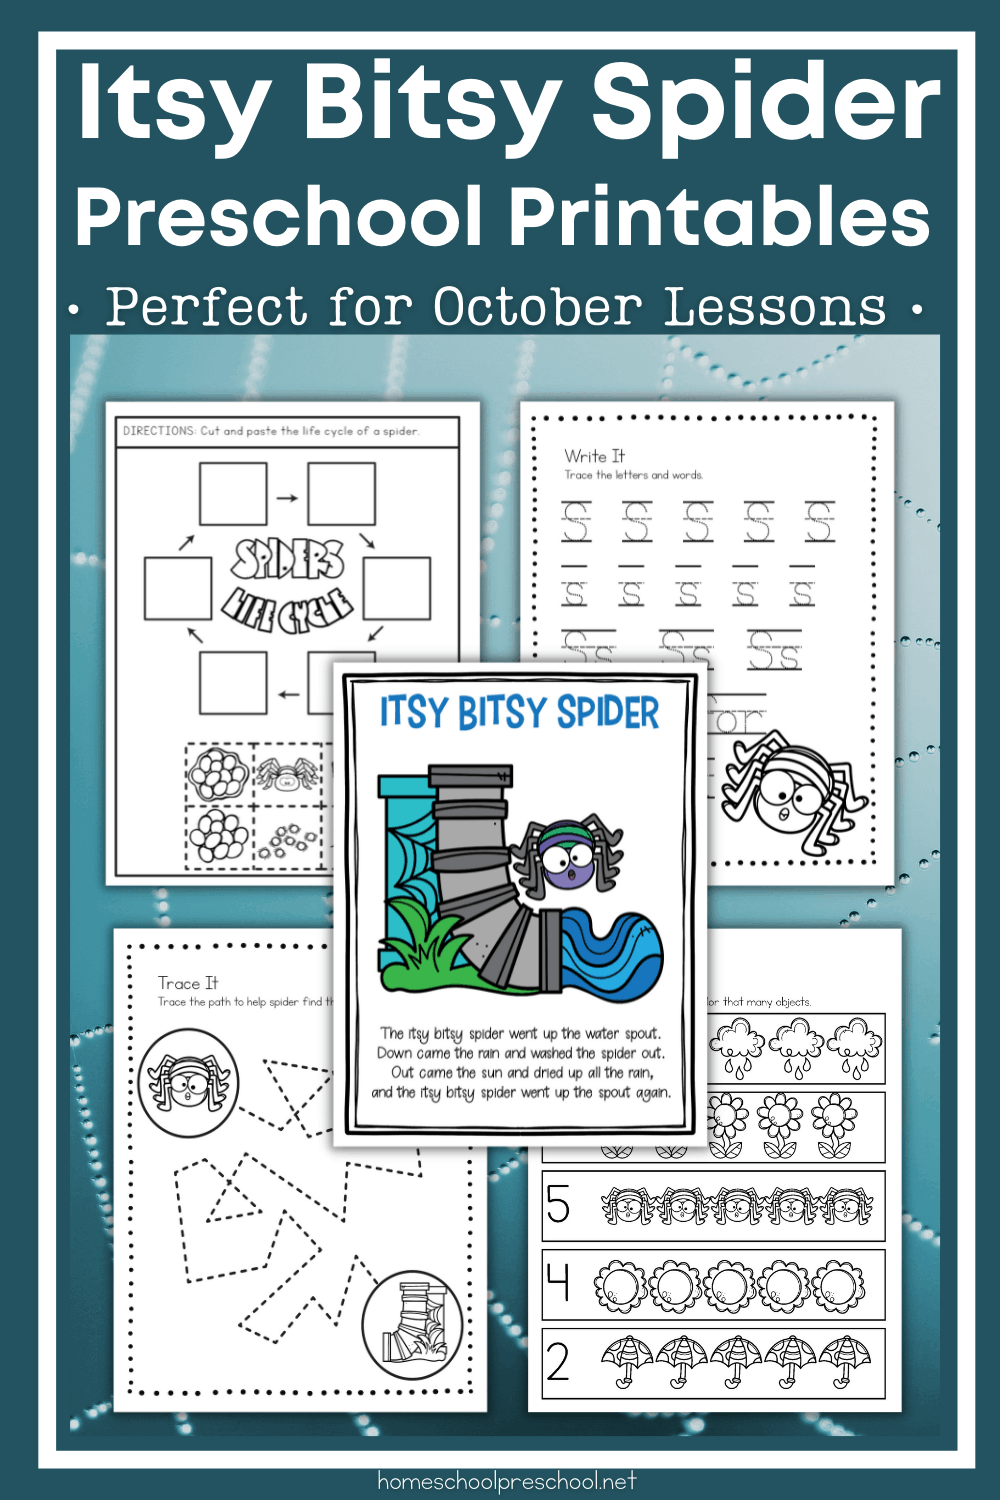 Free Itsy Bitsy Spider Printable For Preschoolers